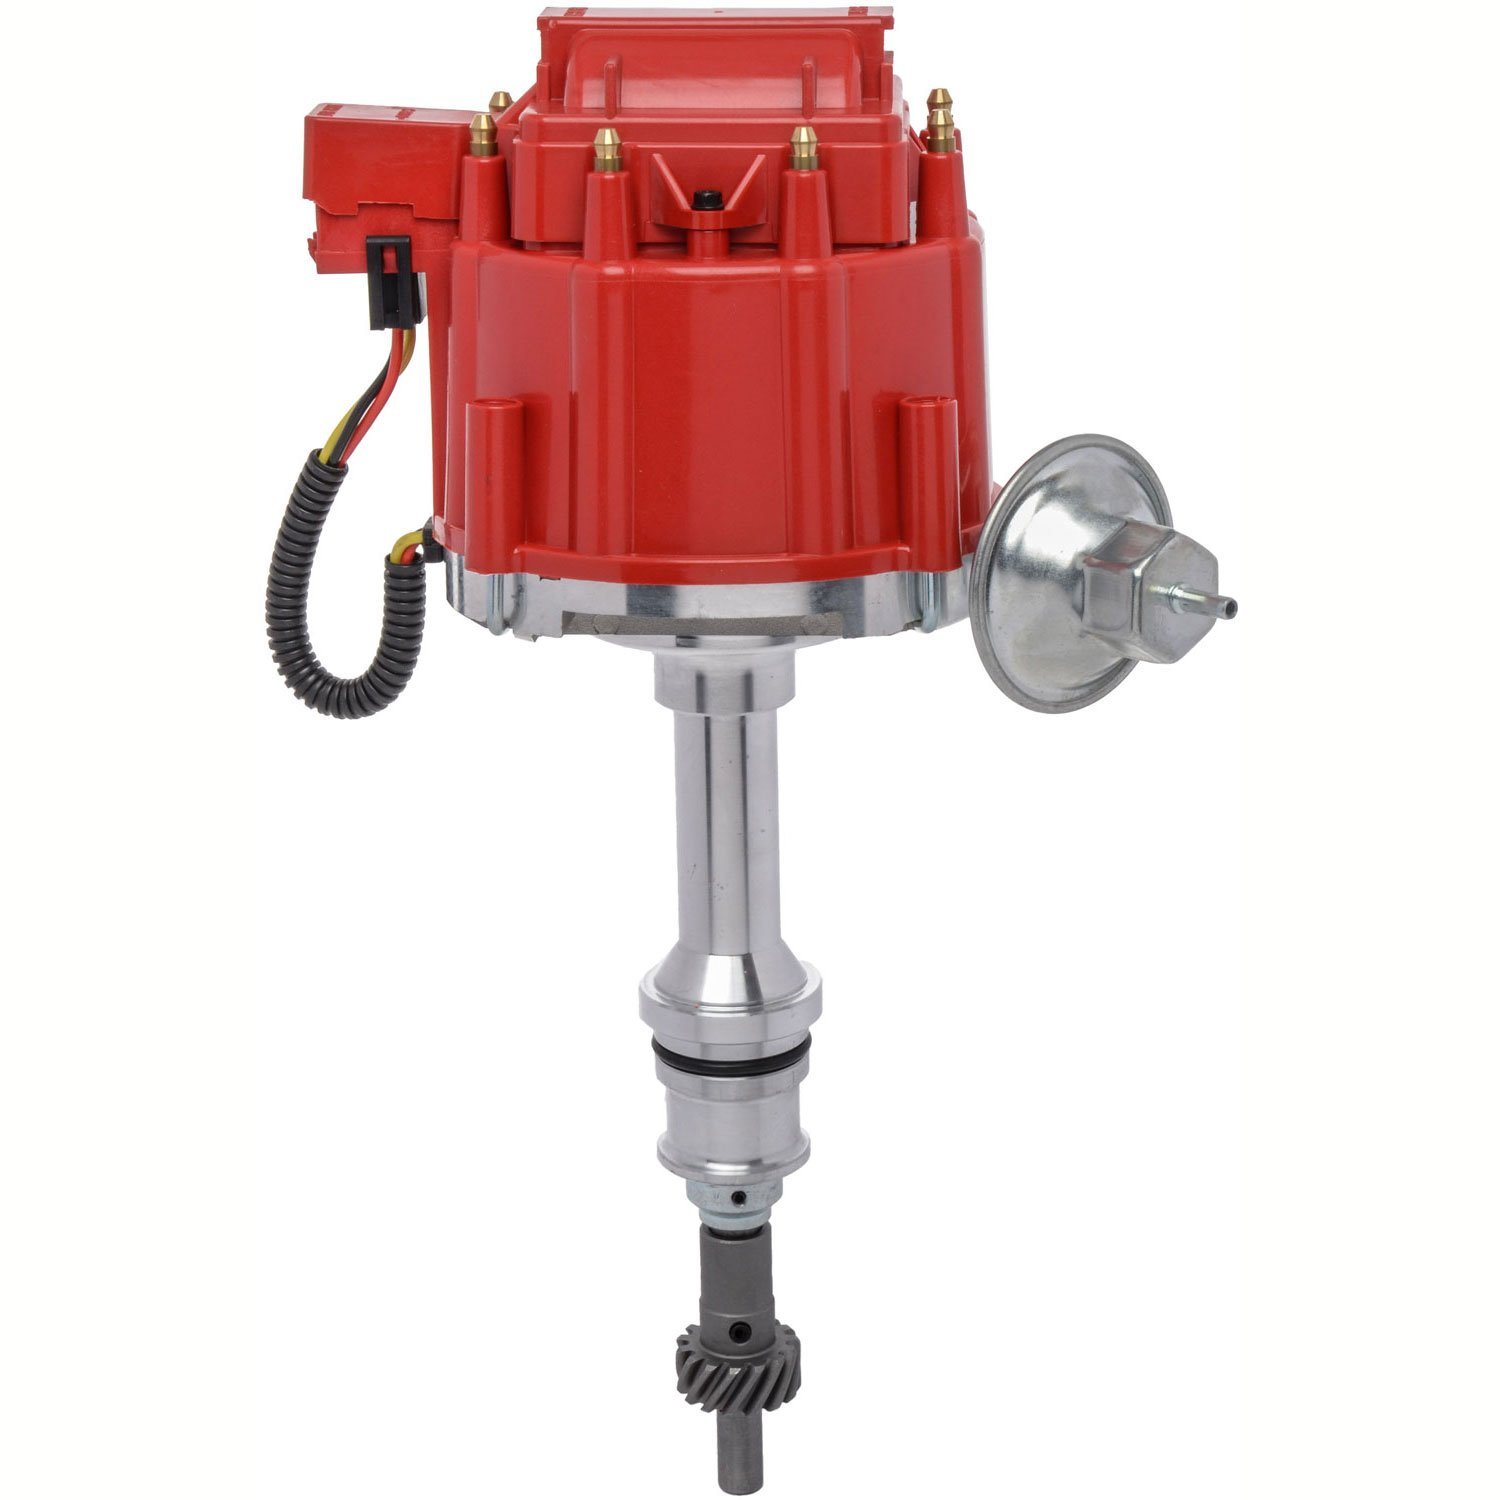 HEI Distributor for Ford Small Block 221-302 V8 Engines [Red Cap]